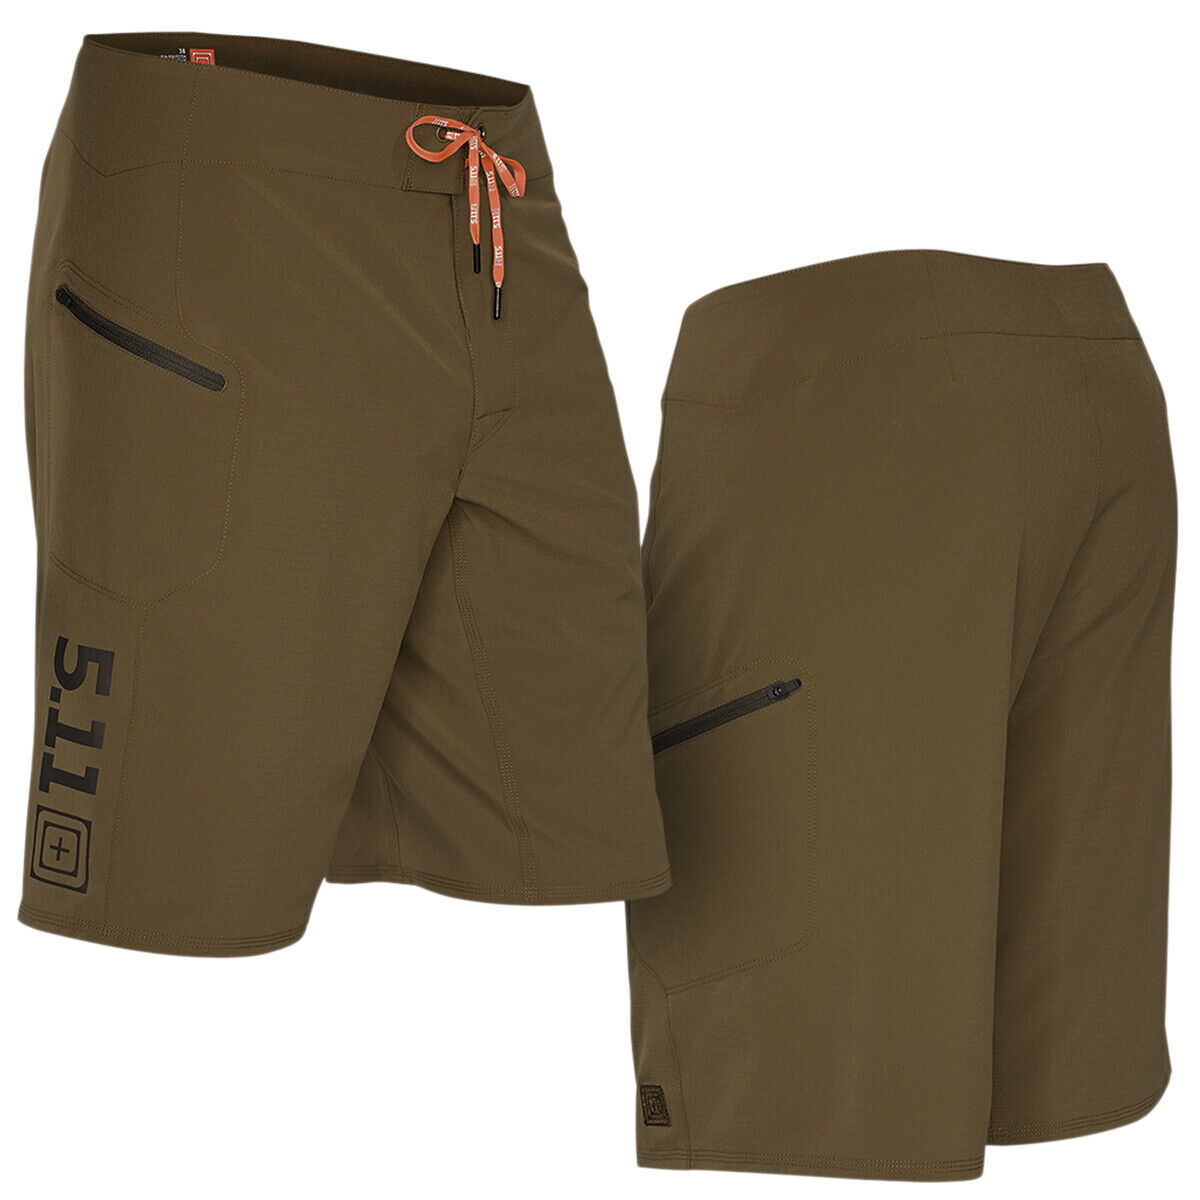 5.11 Tactical Recon Vandal Men's Shorts, 4-Way Stretch for Gym, Cross-Training 